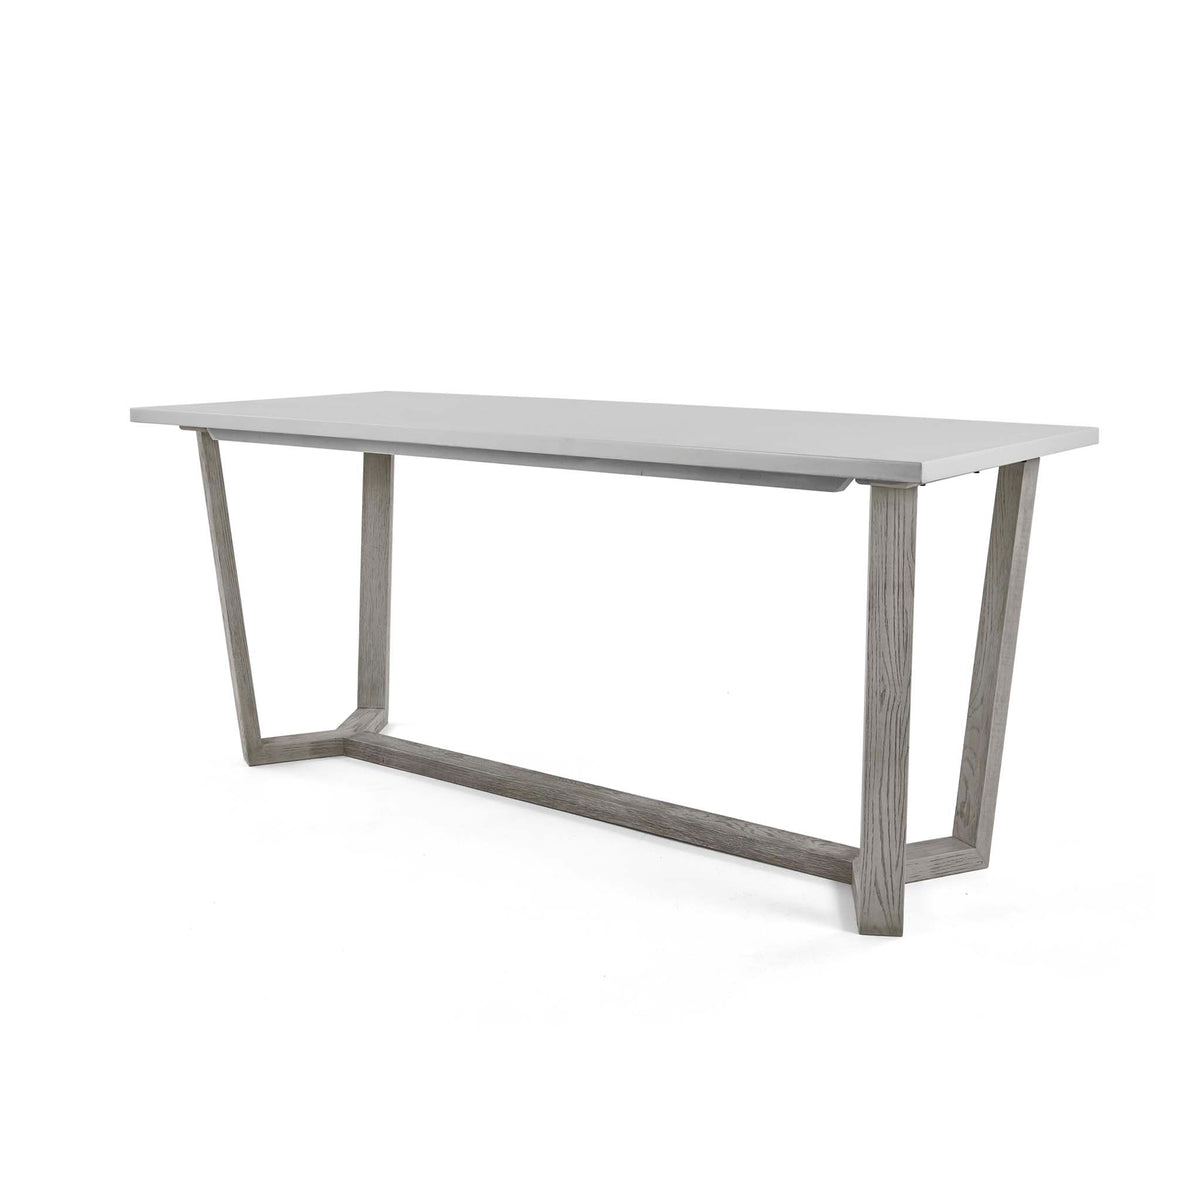 Epsom 150cm Rectangular Dining Table suitable for 4-6 persons